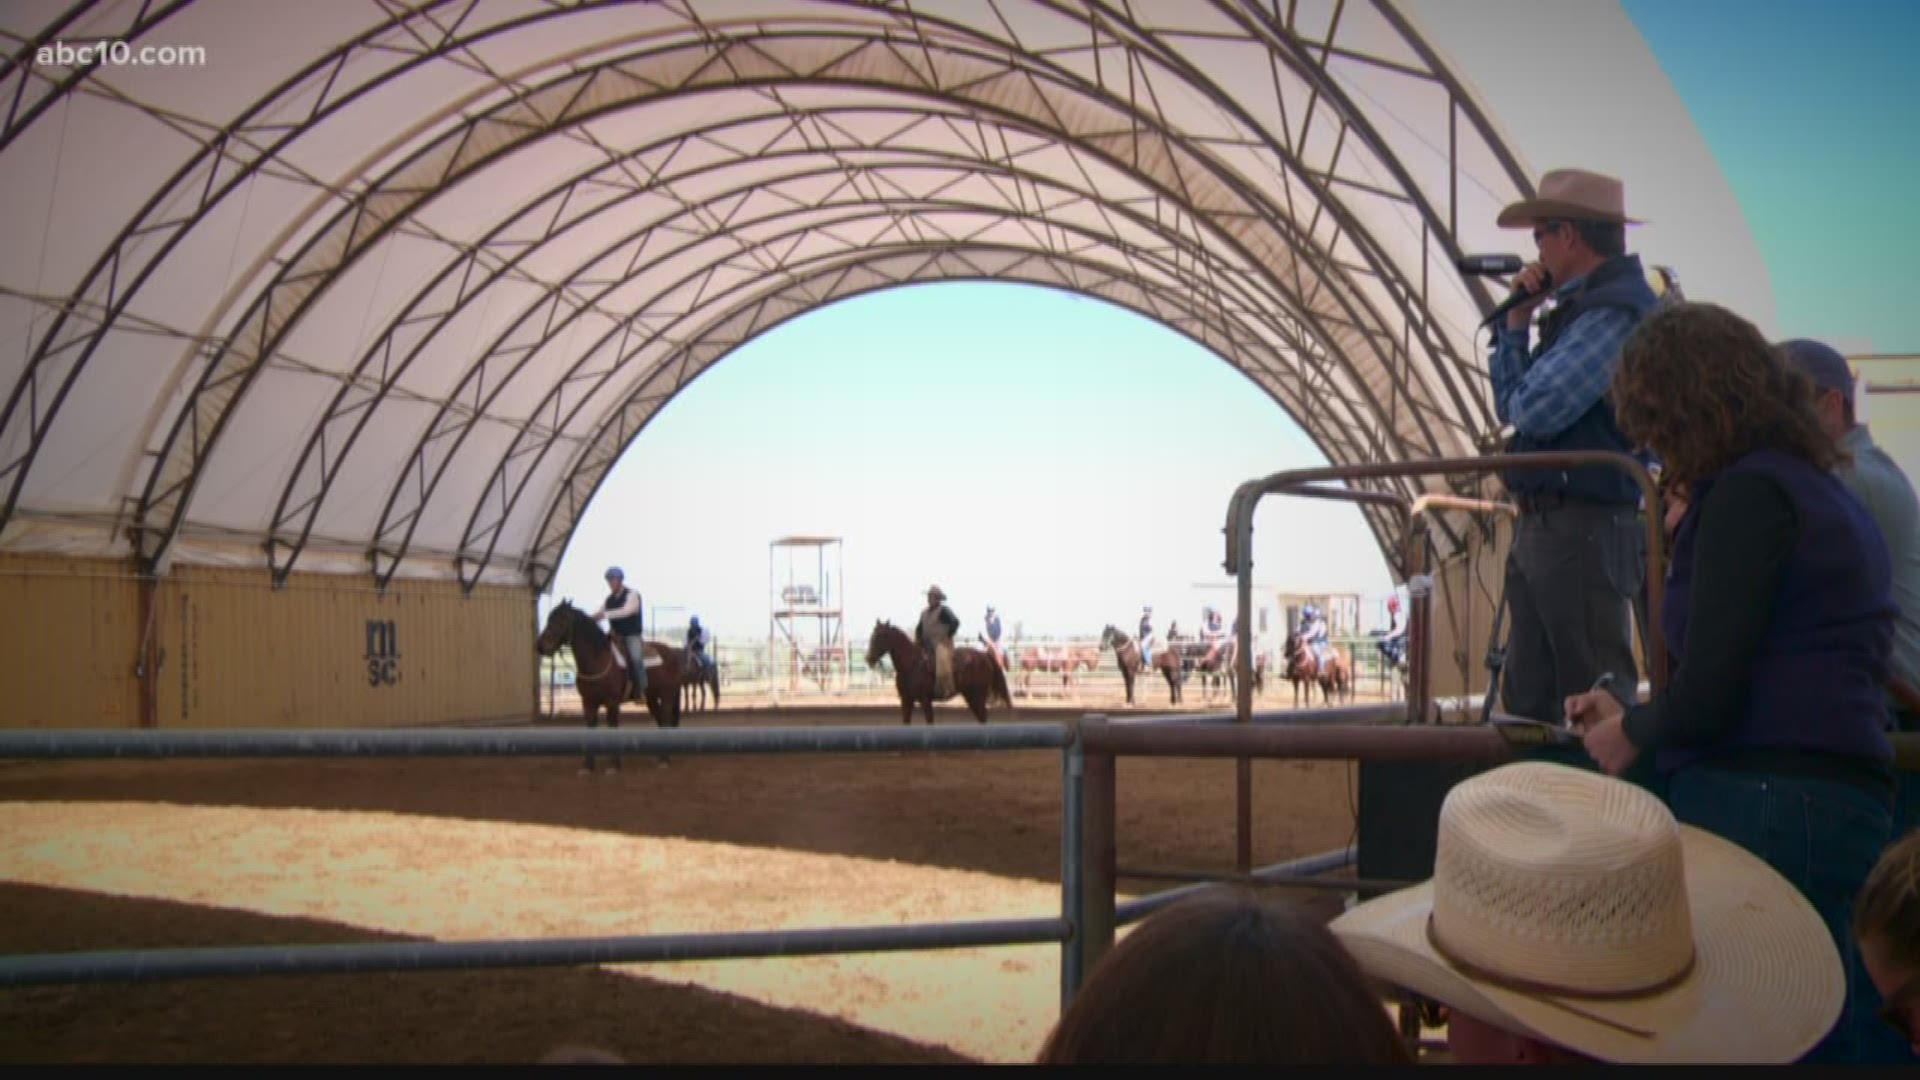 The Second Annual Wild Horse Adoption event was held in Elk Grove Sunday. 